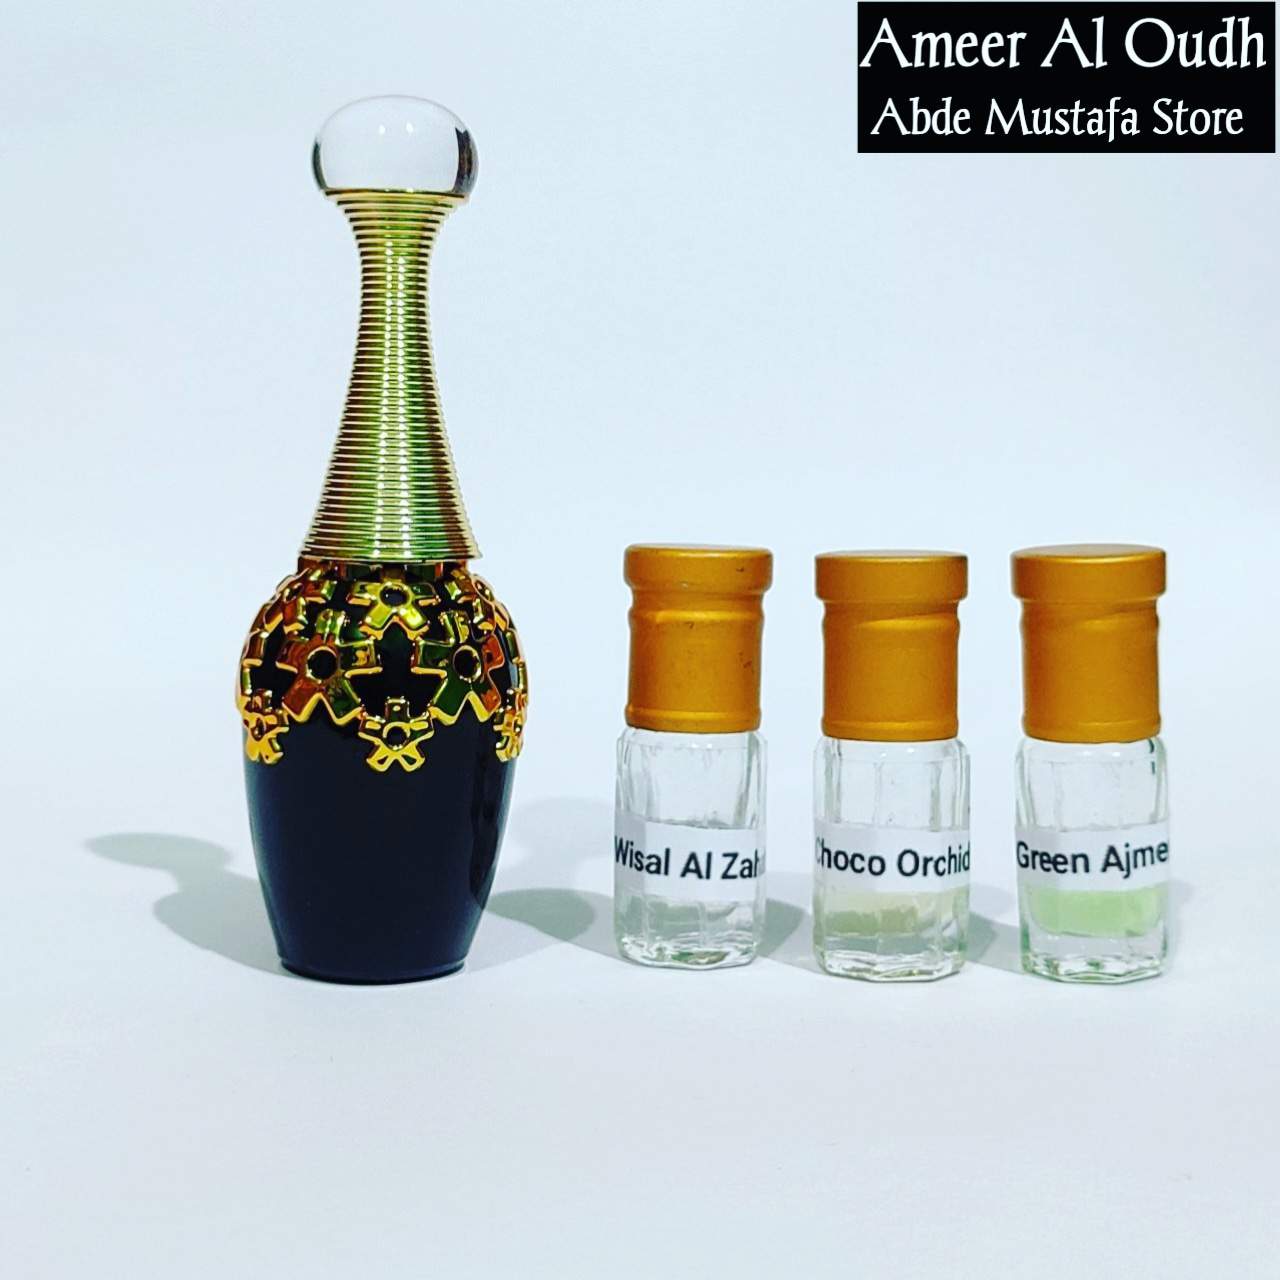 Ameer Al Oud Attar Premium Best Quality With Samples Testers Free By Abde Mustafa Store